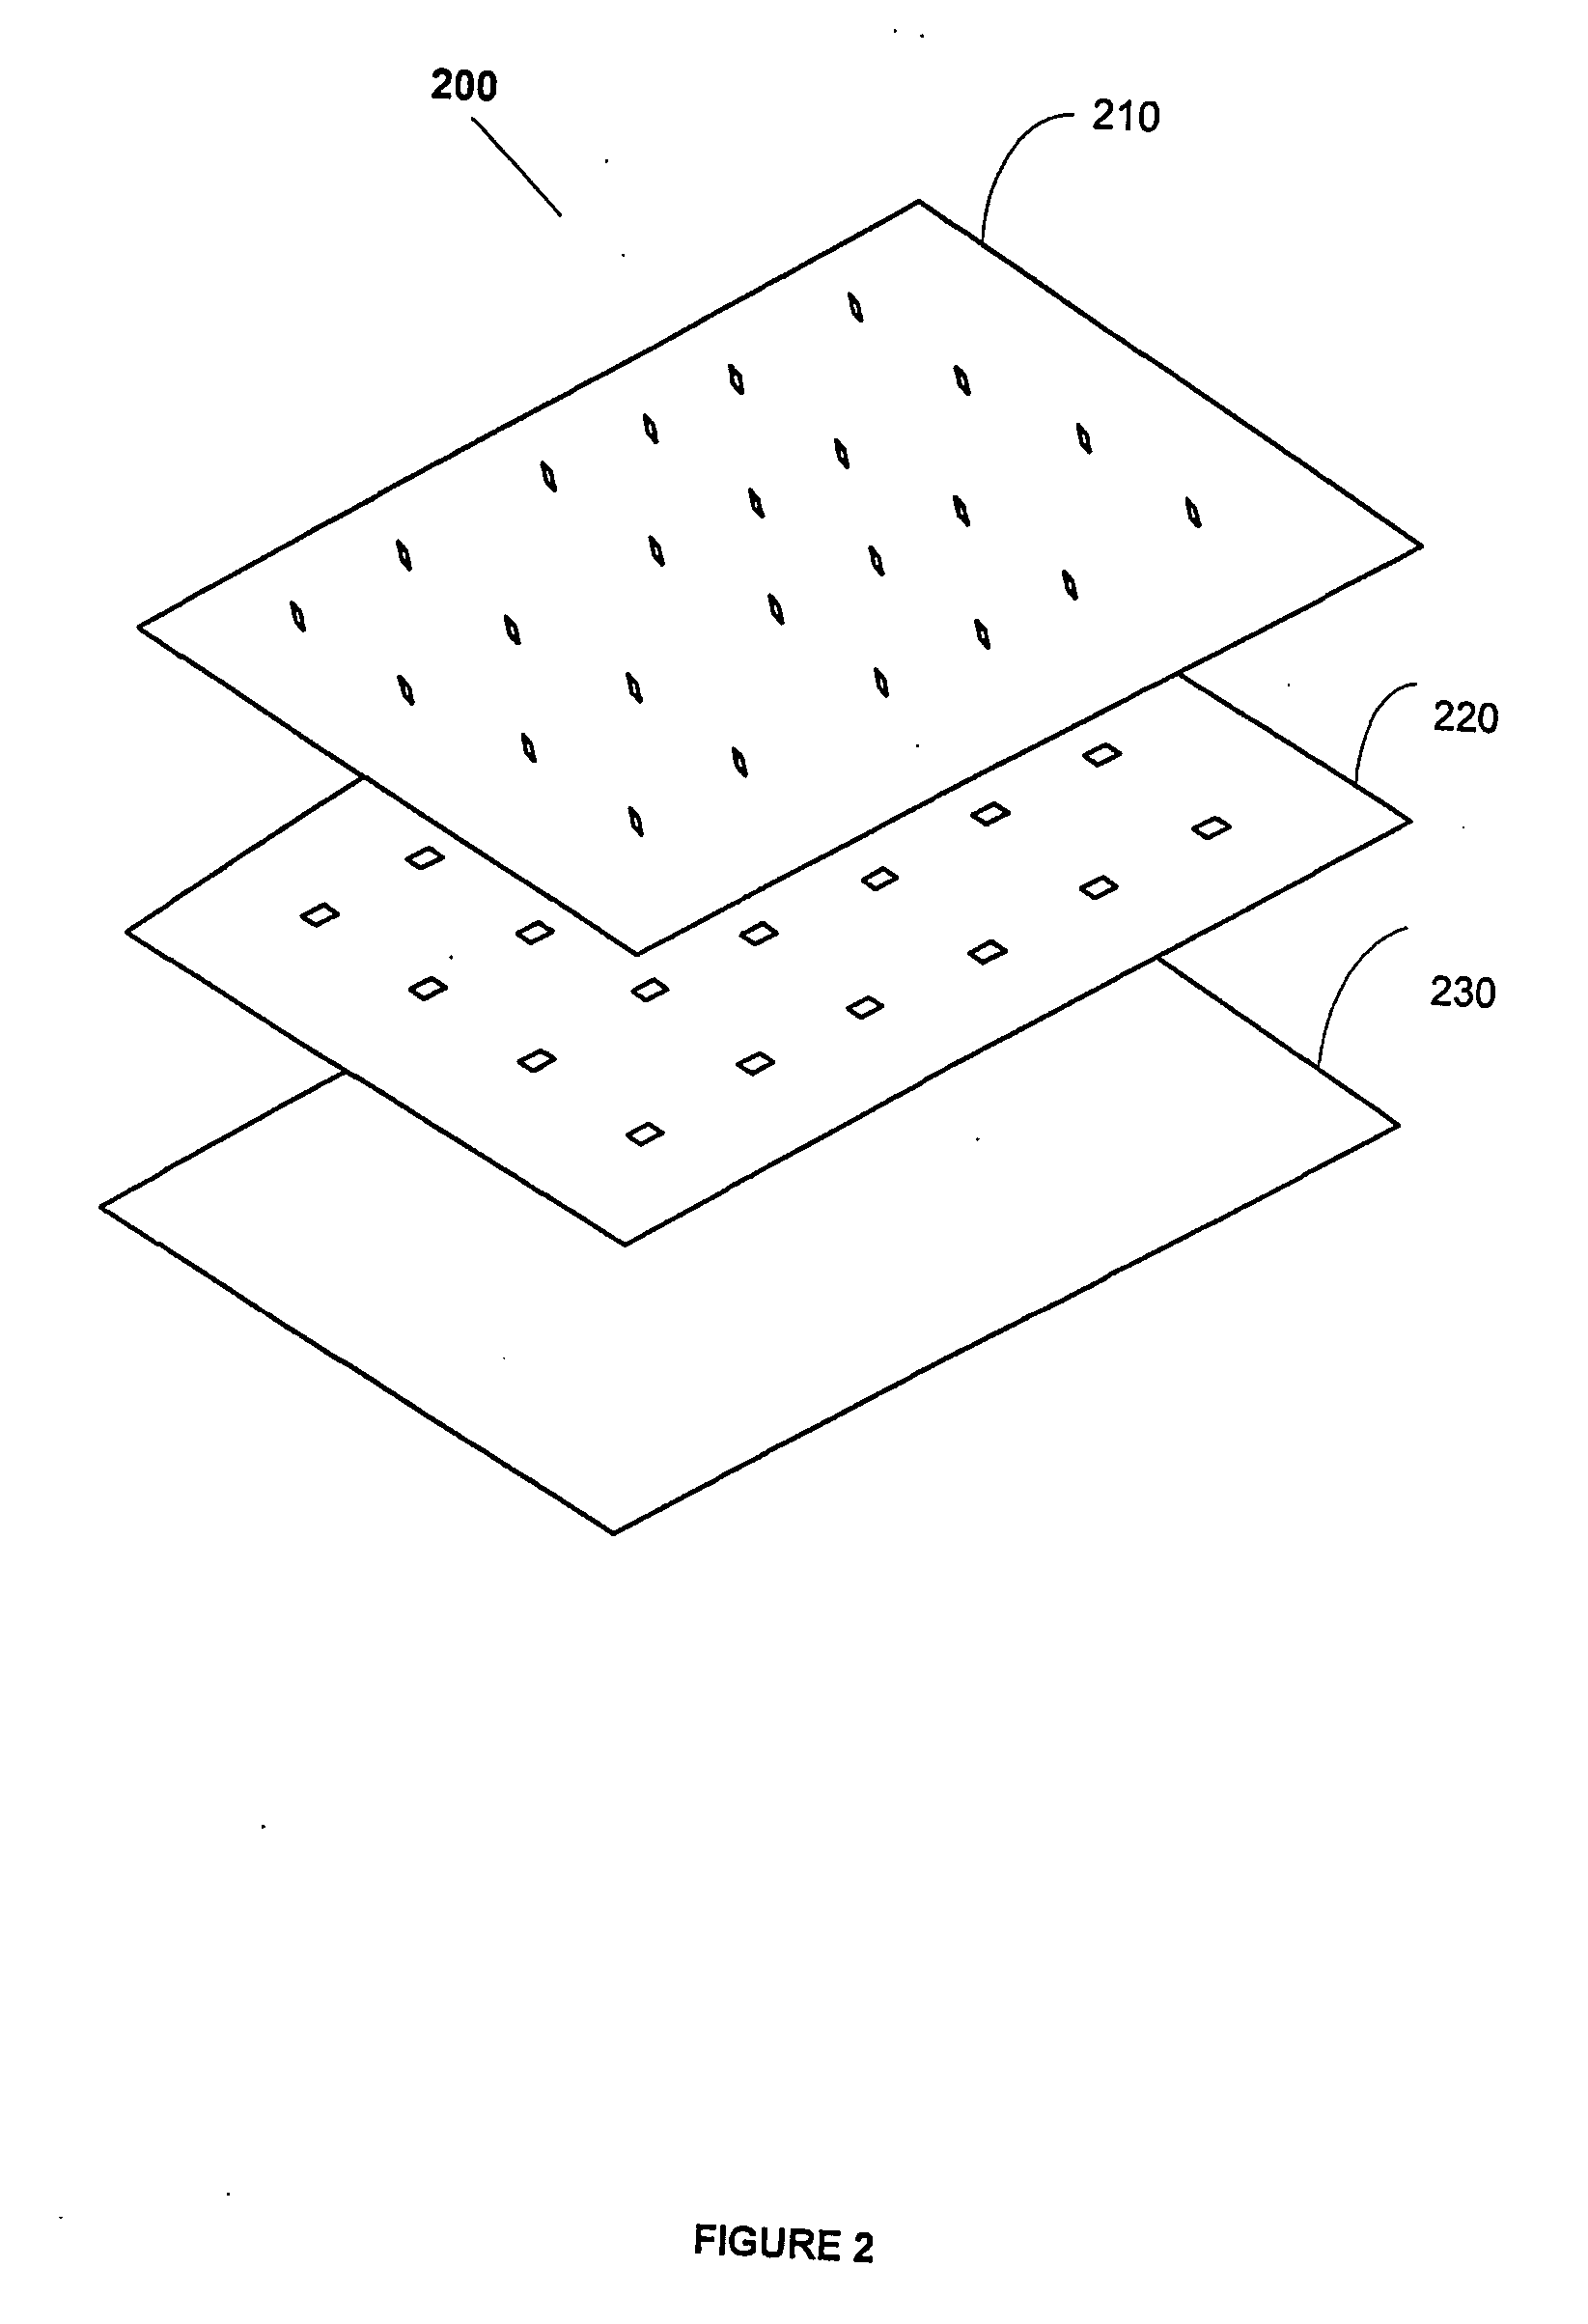 Freeze-drying microscope stage apparatus and process of using the same